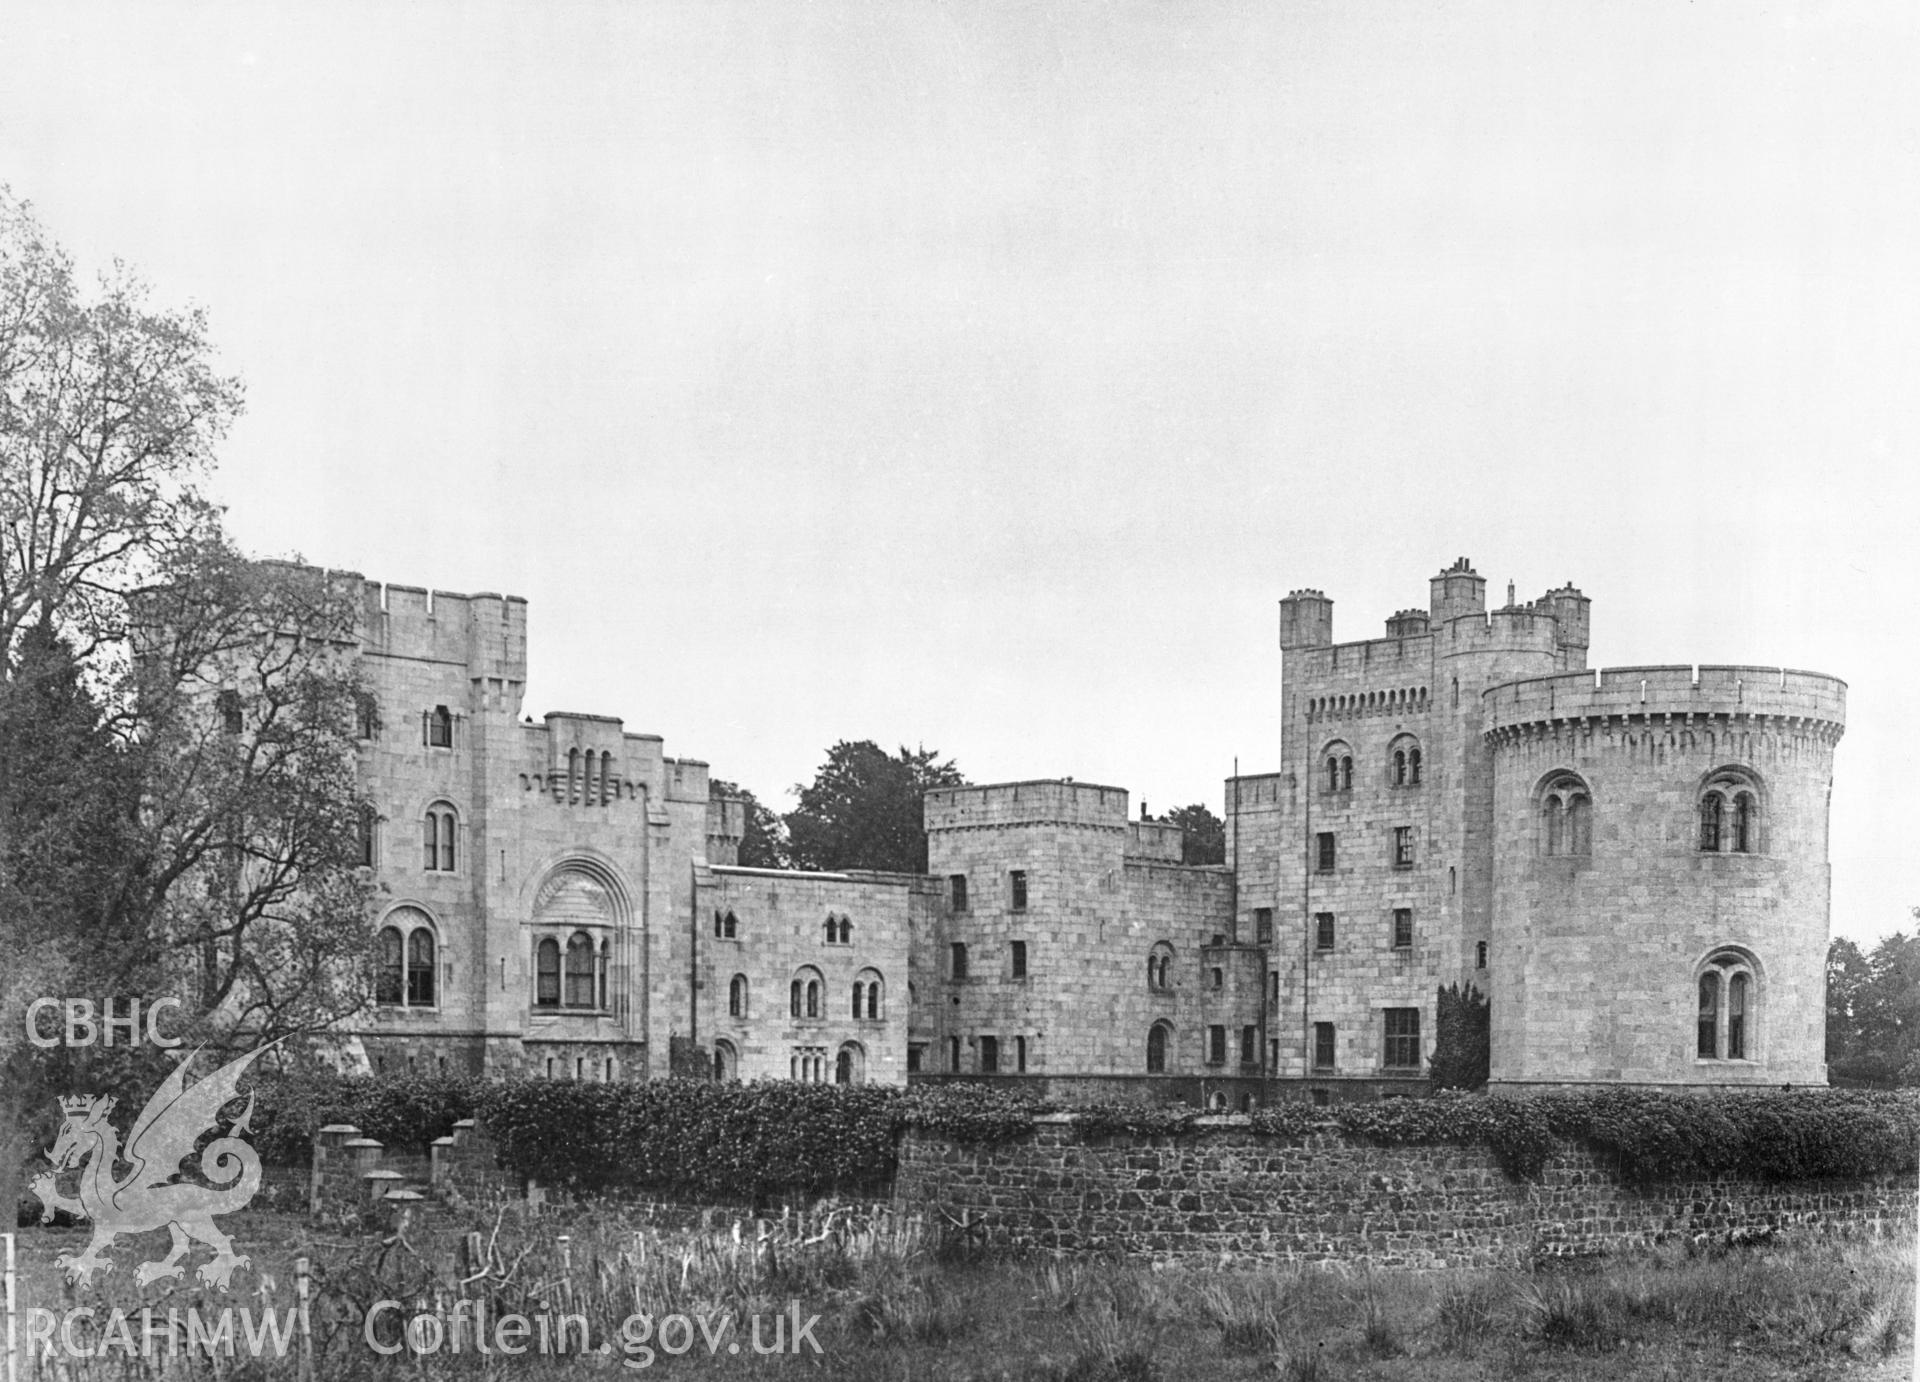 Penrhyn Castle; one undated black and white photograph taken by RCAHMW.